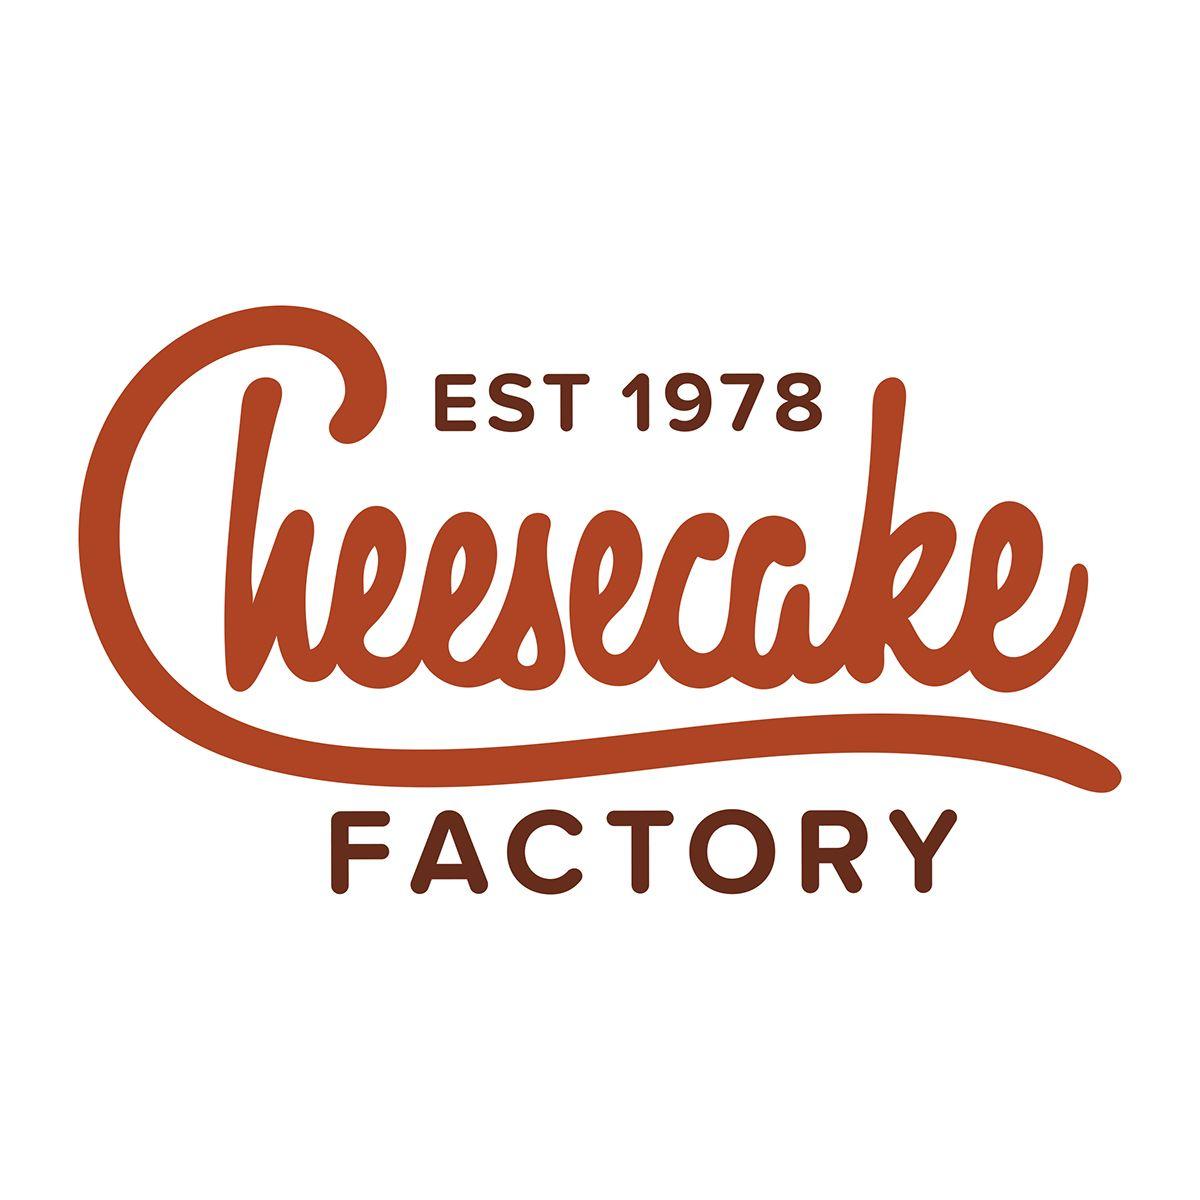 Cheesecake Logo - The Cheesecake Factory Redesign Project